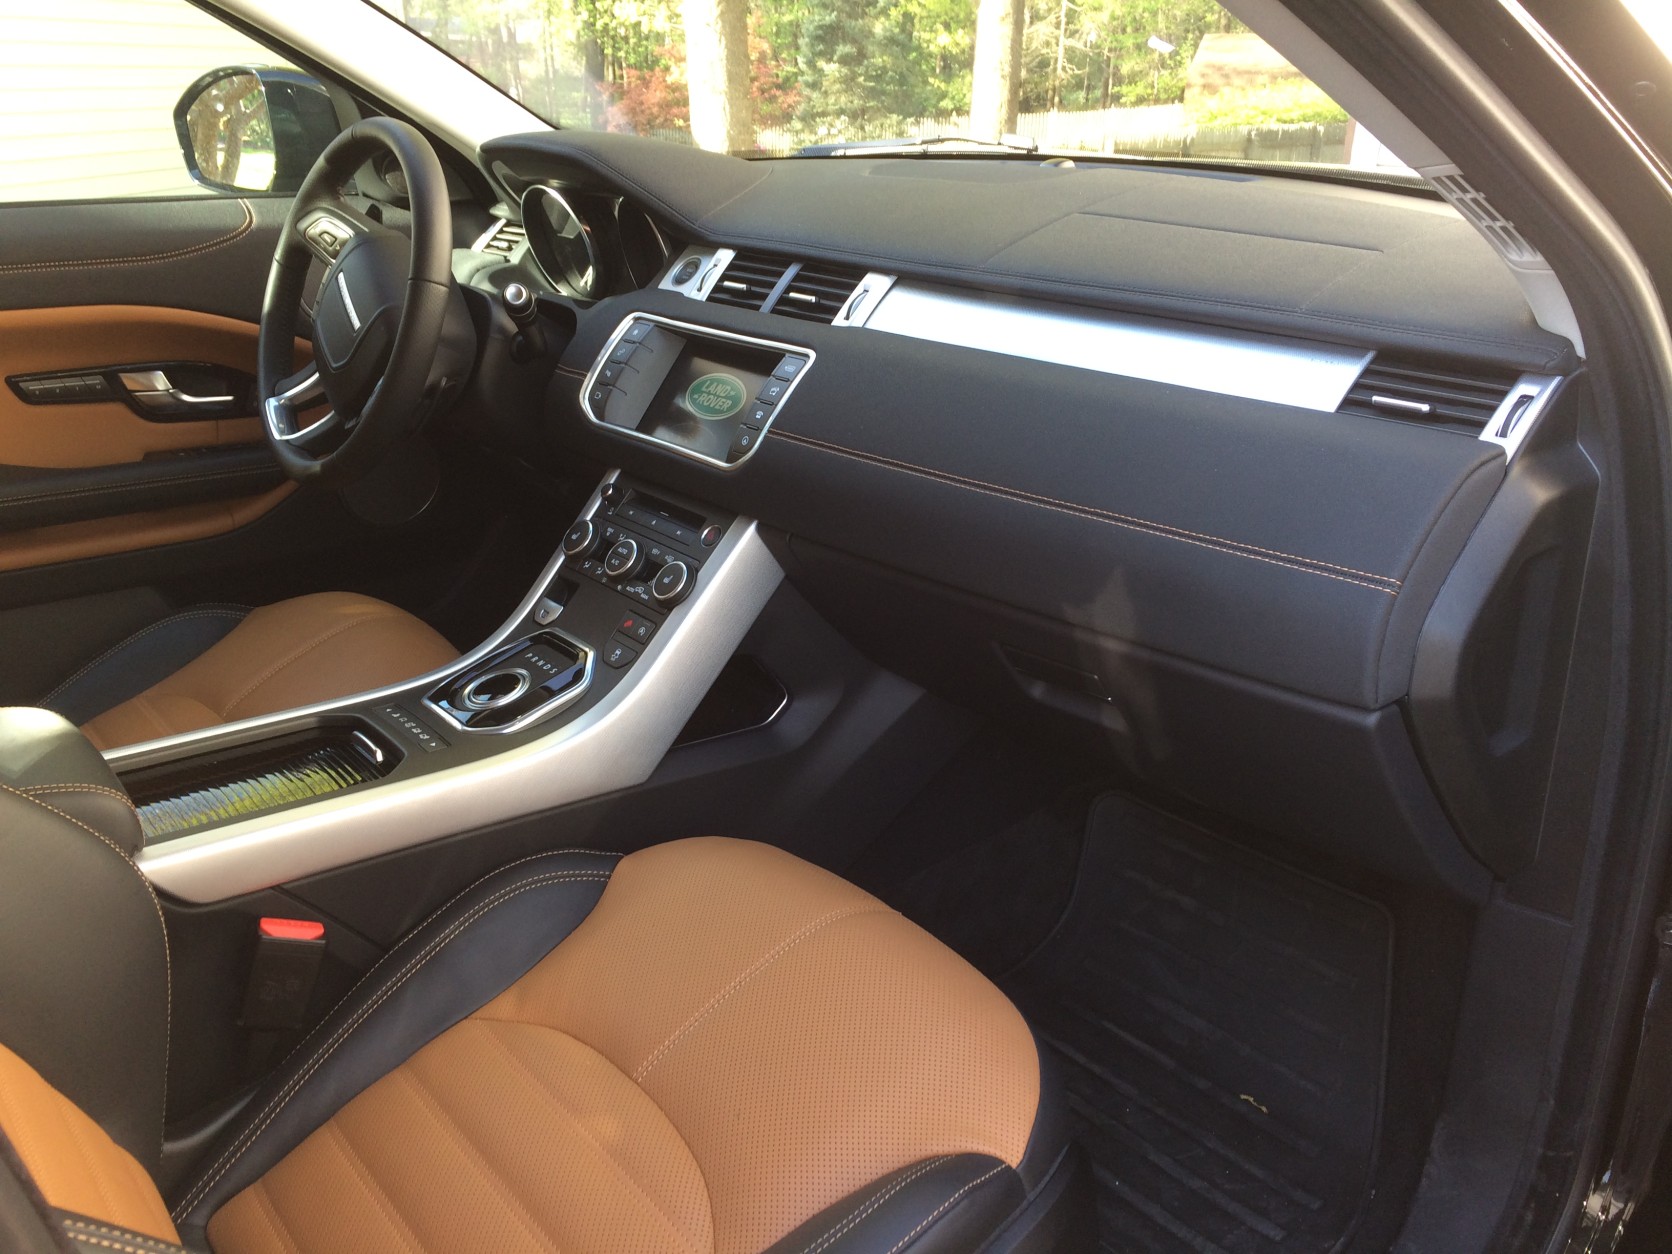 Car Report's Mike Parris describes the Evoque's interior as "sweet." (WTOP/Mike Parris)